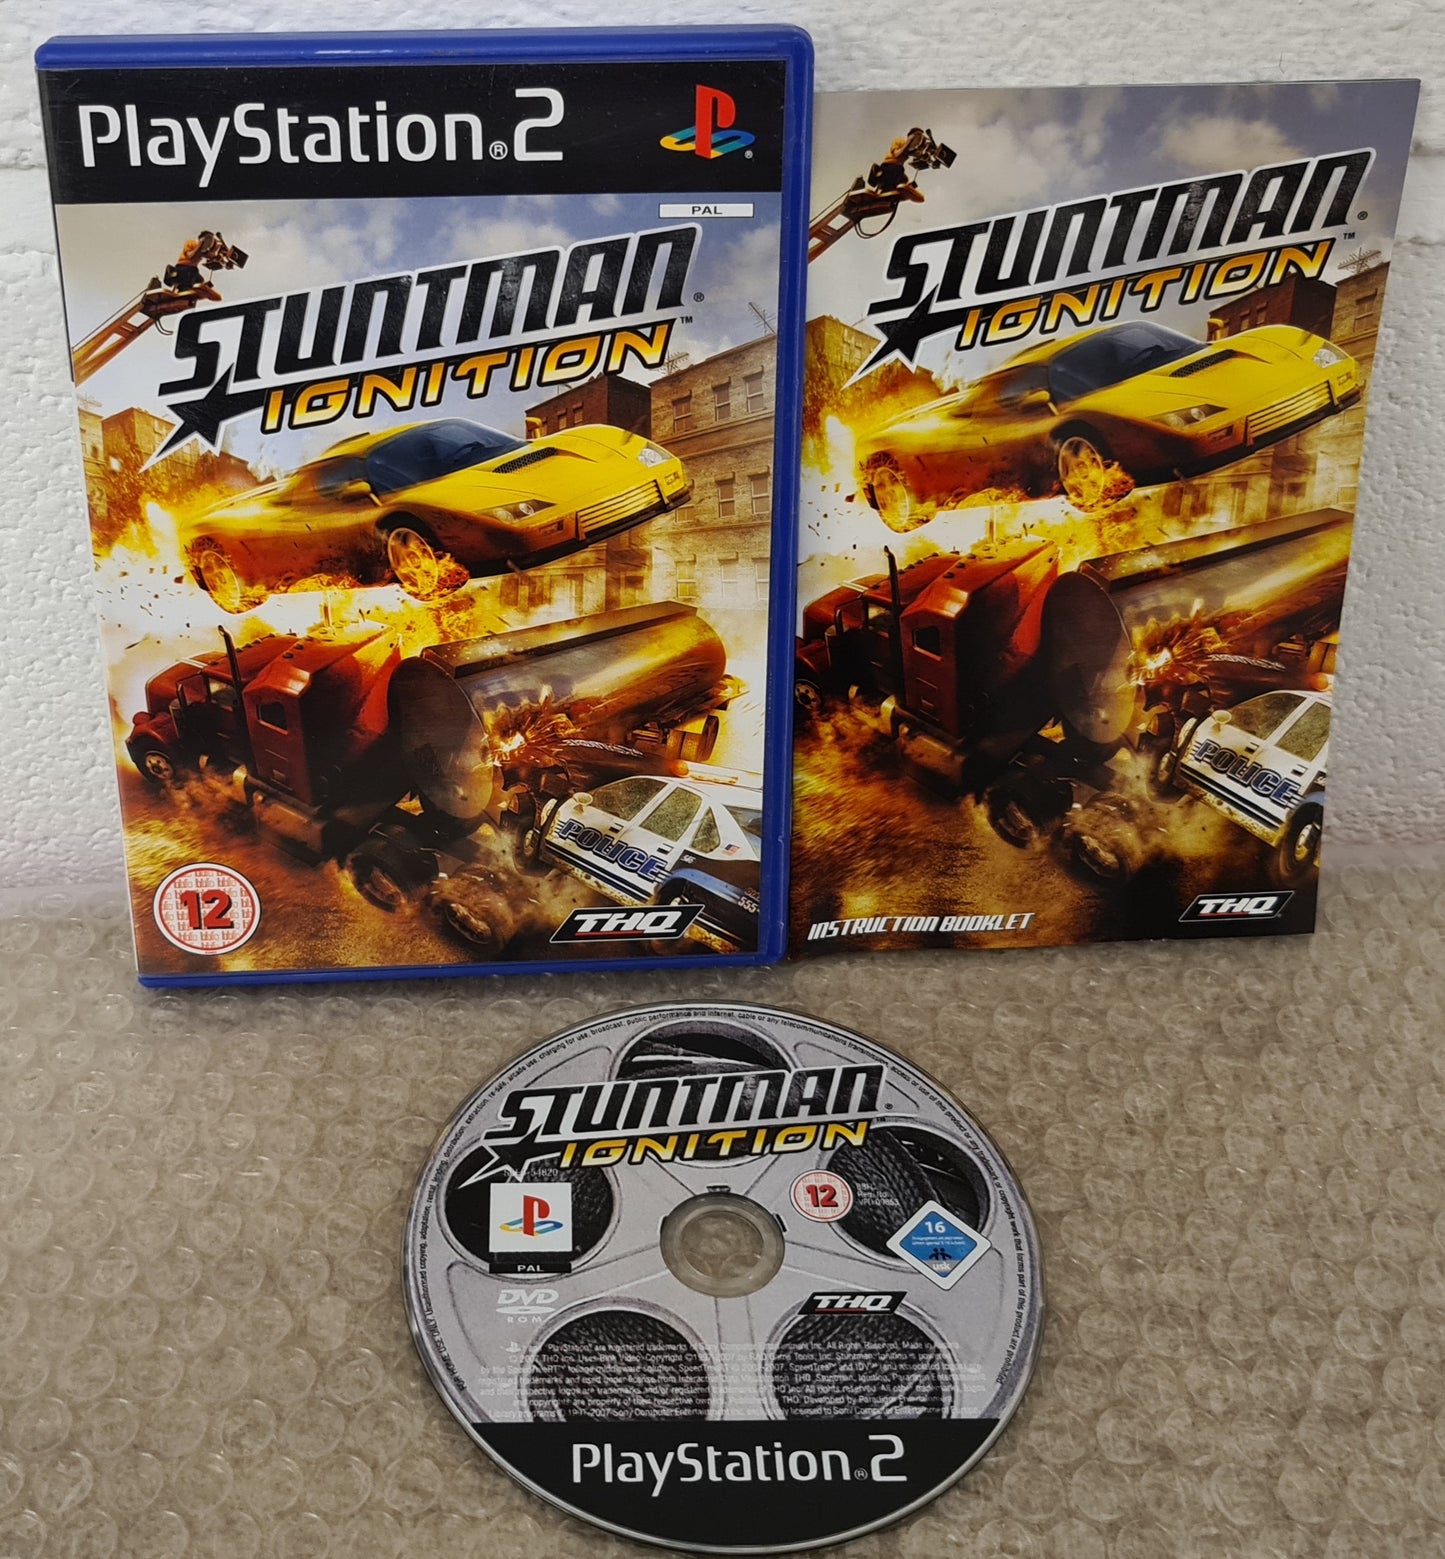 Stuntman Ignition Sony Playstation 2 (PS2) Game